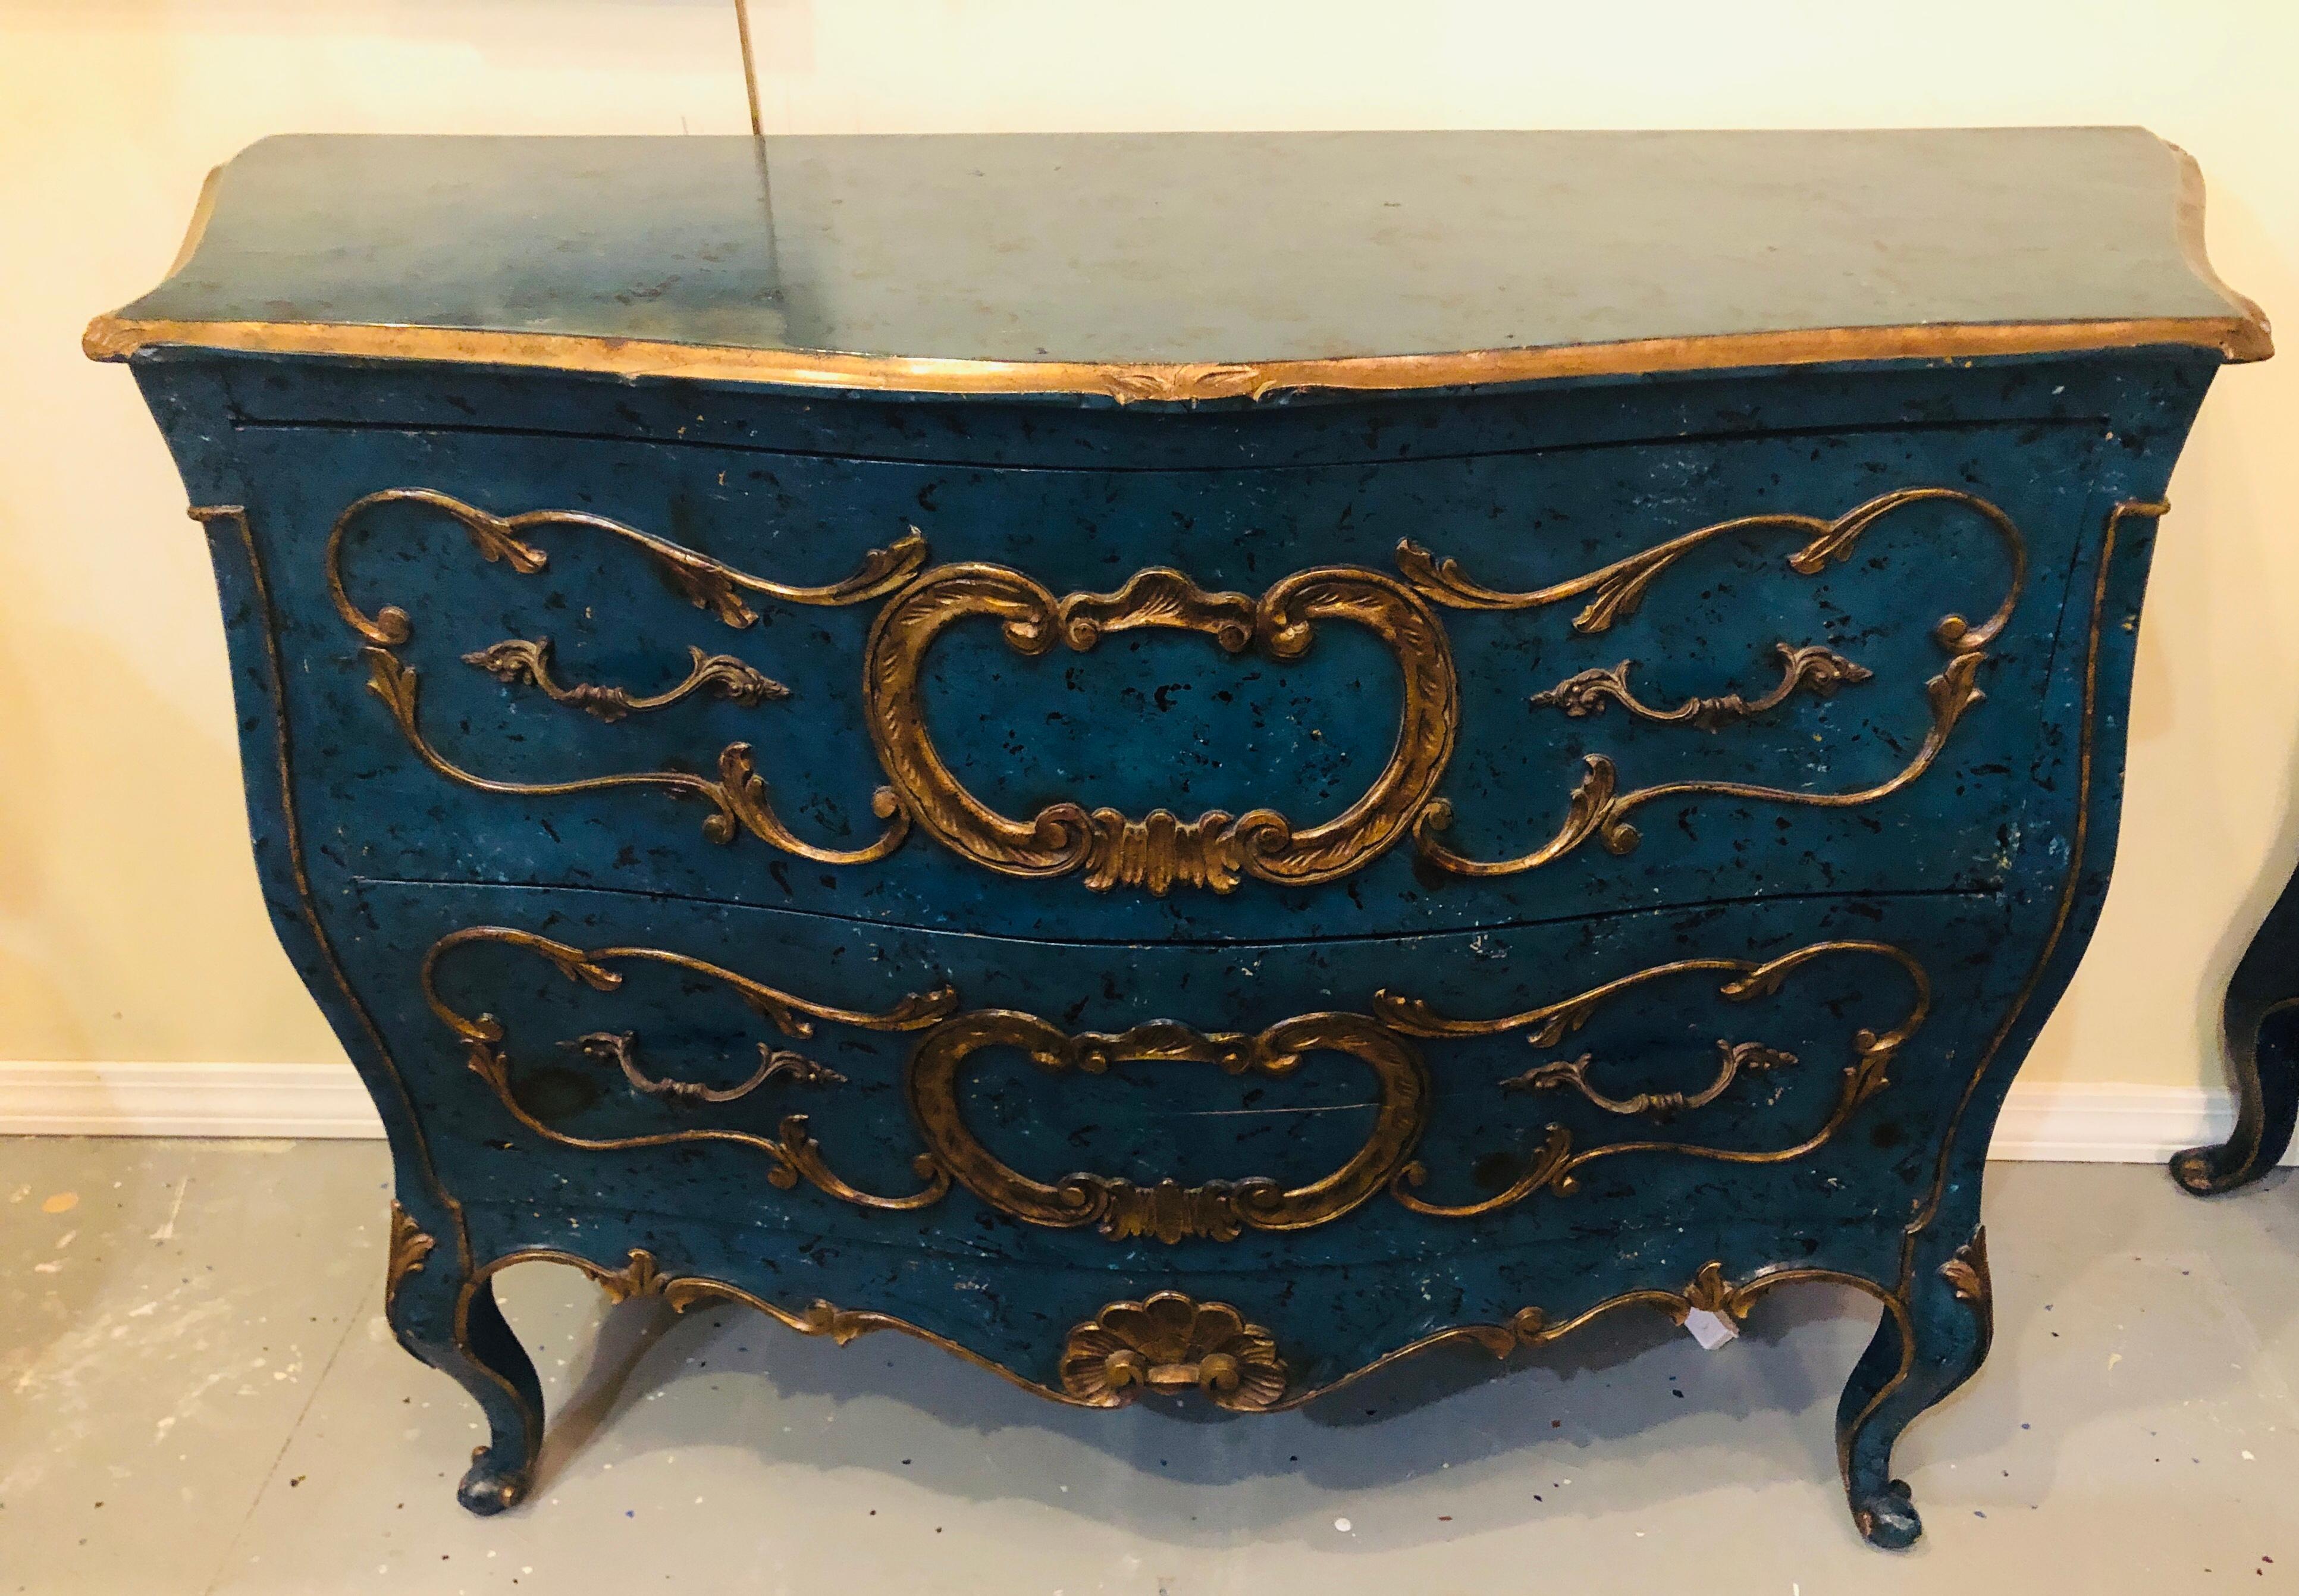 Hollywood Regency Pair of Royal Blue and Parcel-Gilt Decorated Bombay Commodes or Chests